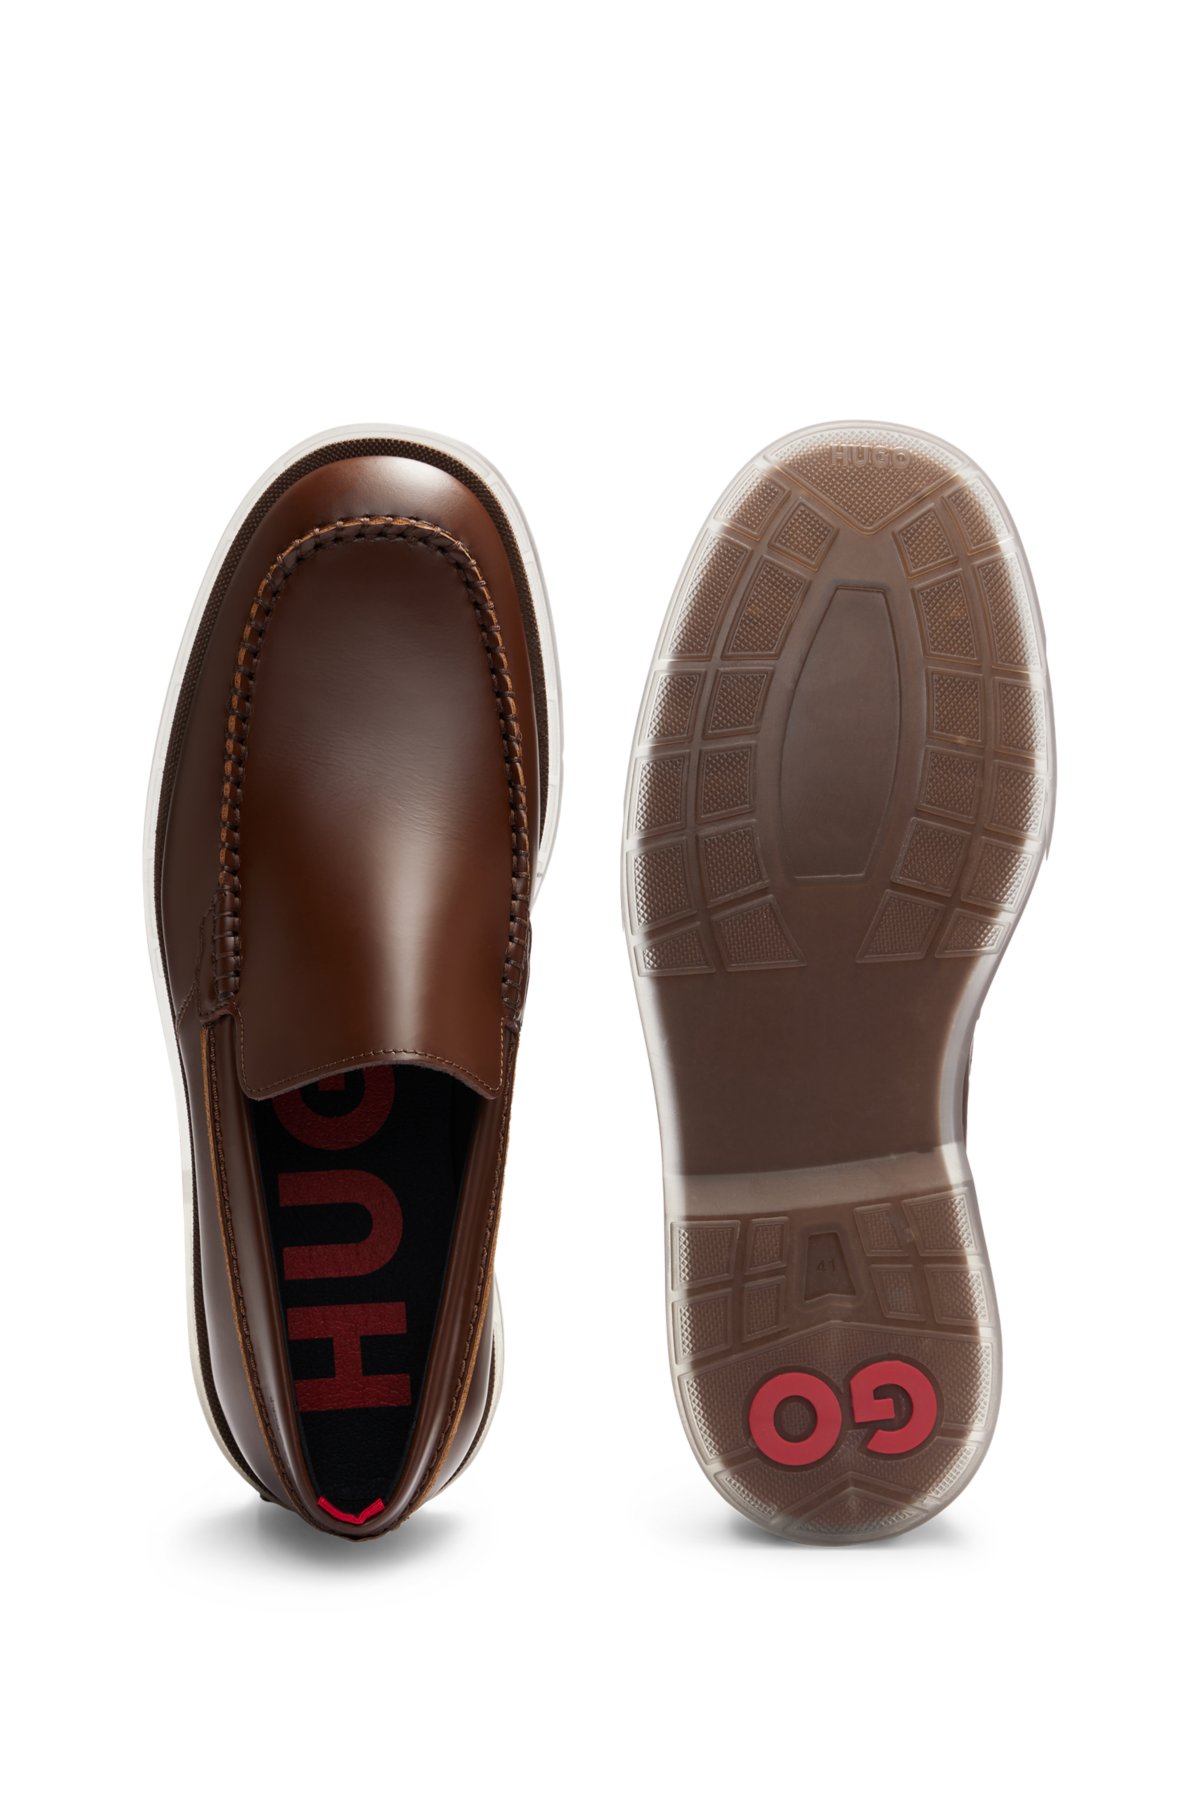 Leather loafers with translucent rubber sole, Brown